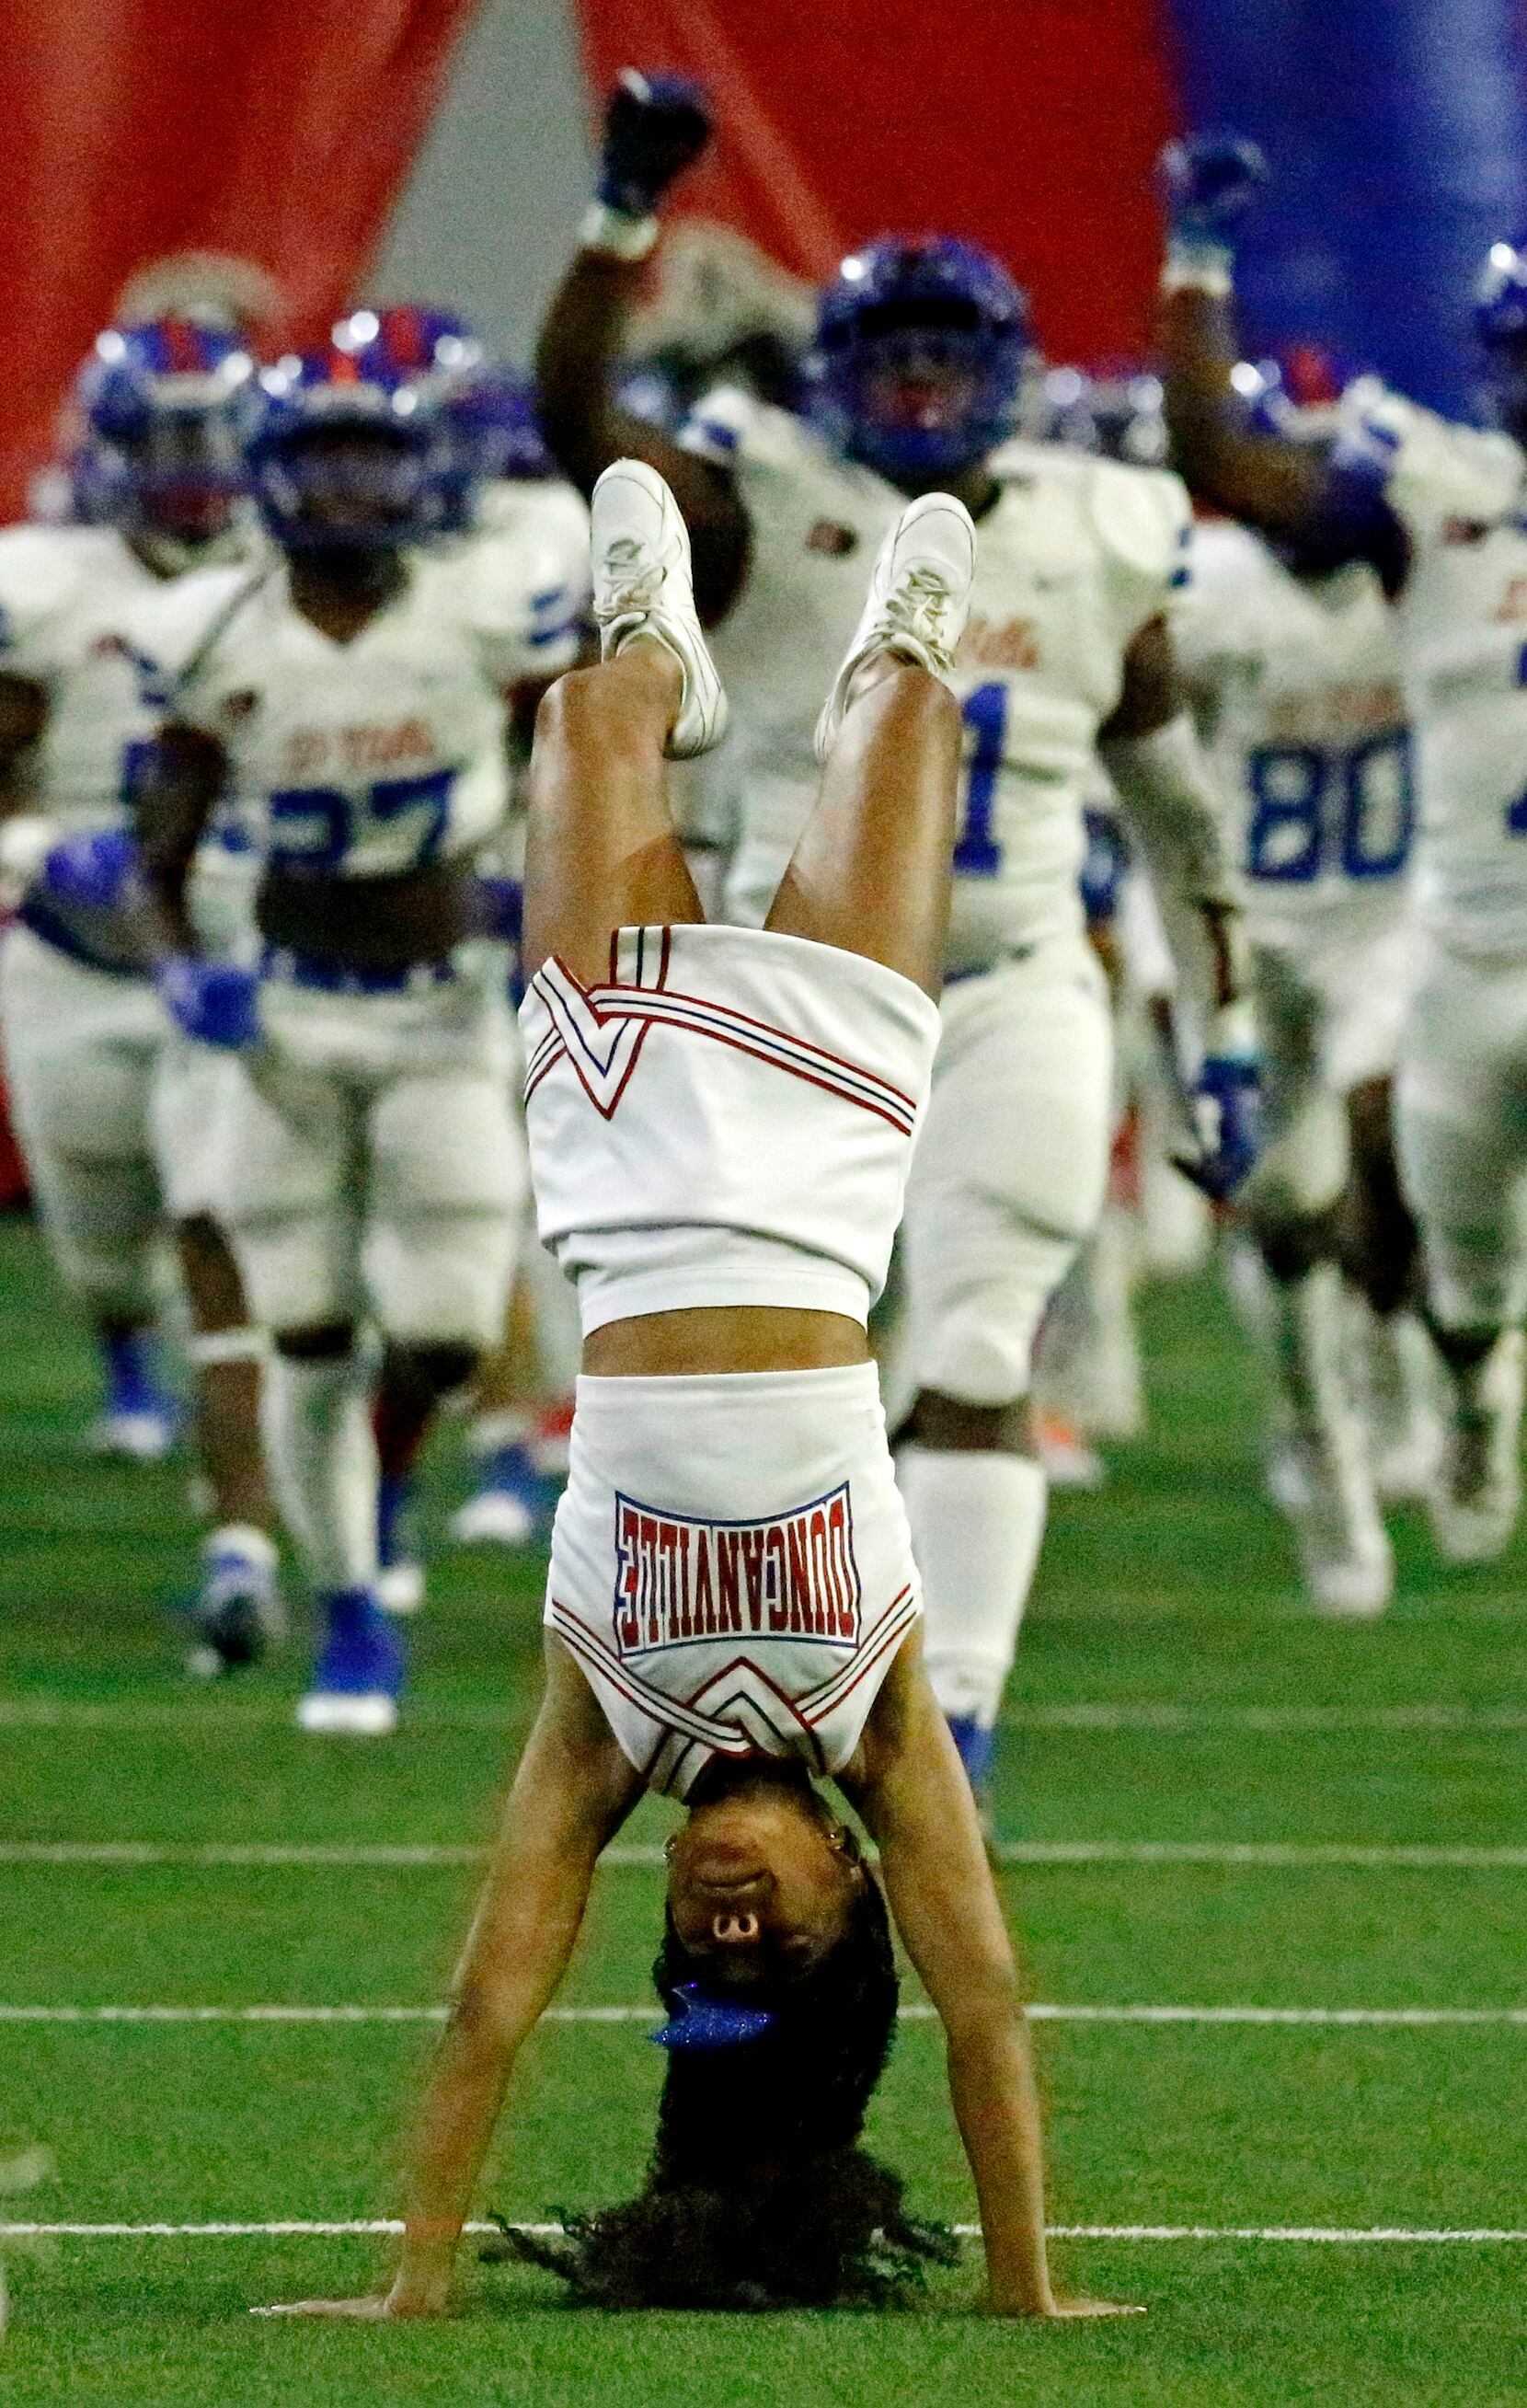 Duncanville cheerleaders do backflips in front of their team entering the field before kickoff  as Duncanville High School played Spring High School in a Class 6A Division I Region II semifinal football game at The Ford Center in Frisco on Saturday, November 27, 2021. (Stewart F. House/Special Contributor)